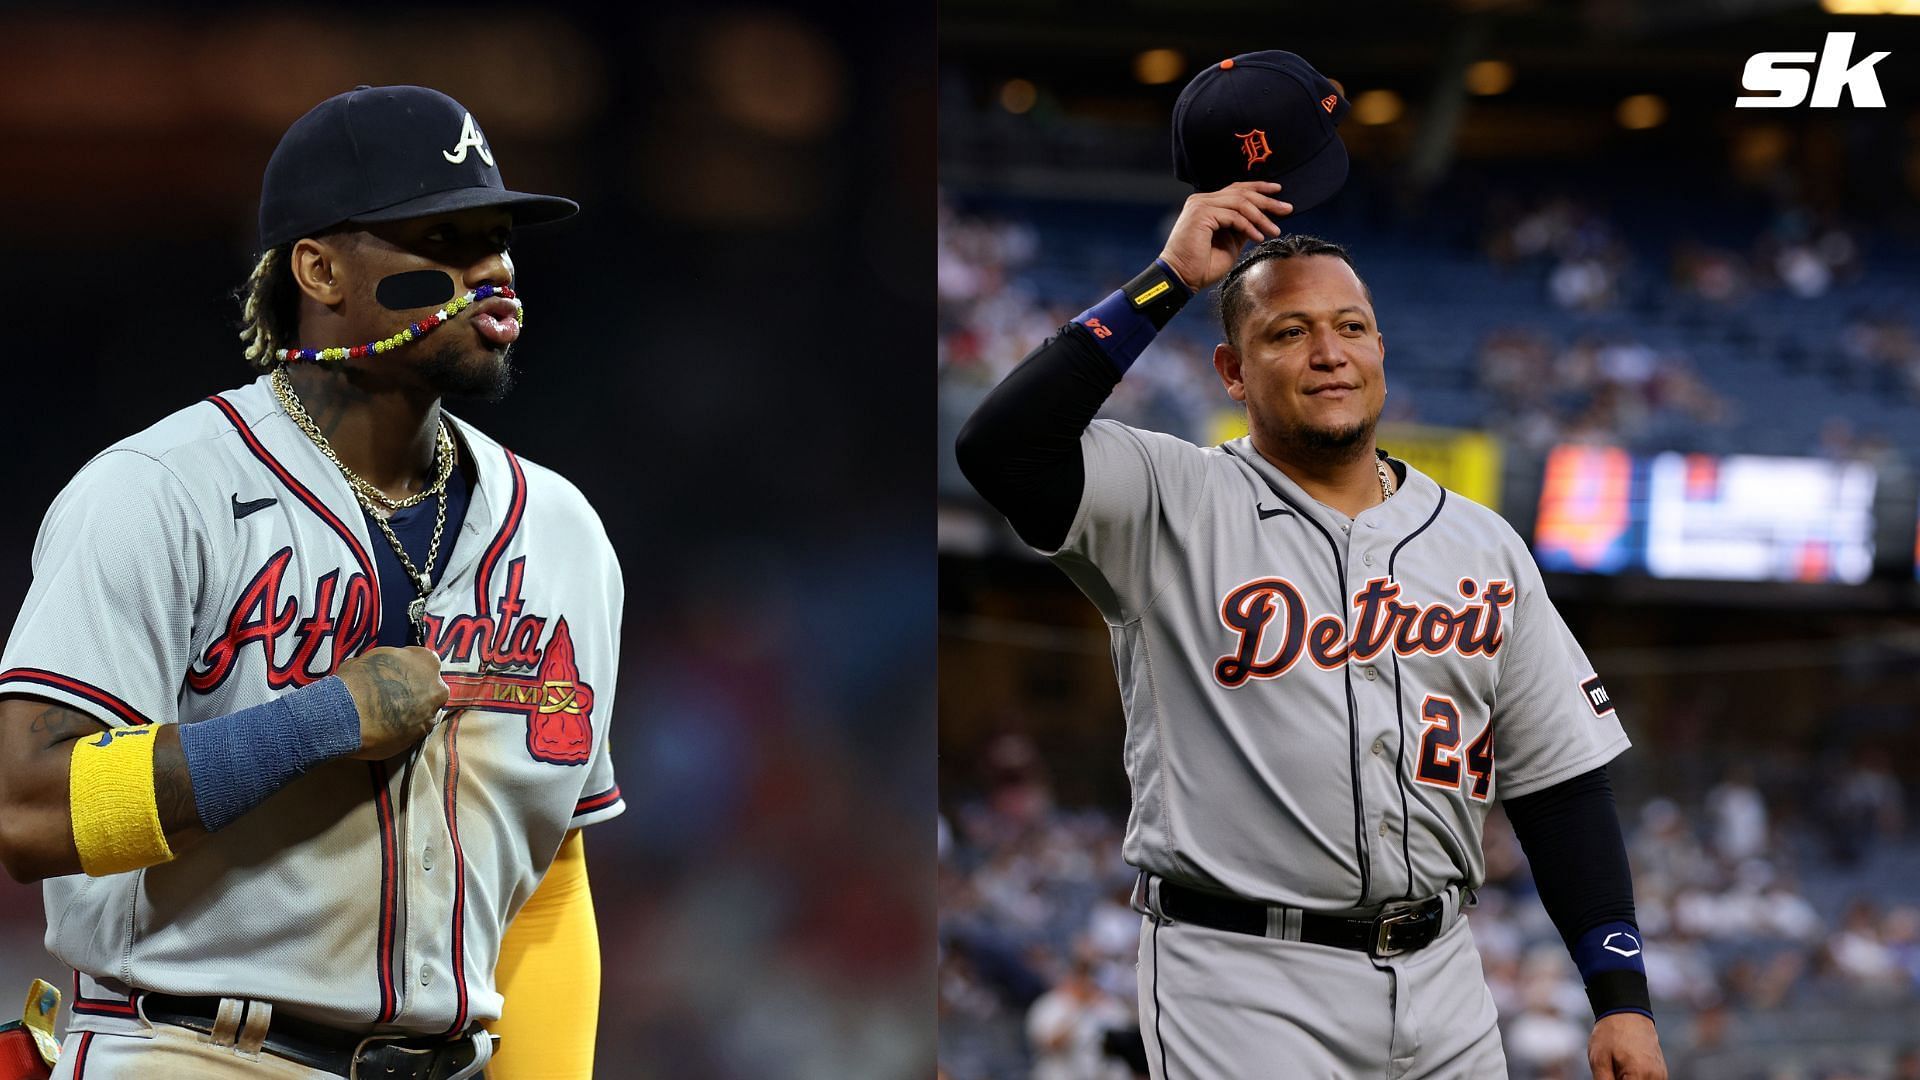 Ronald Acuna Jr. is joining Miguel Cabrera in the running for the best Venezuelan baseball players ever